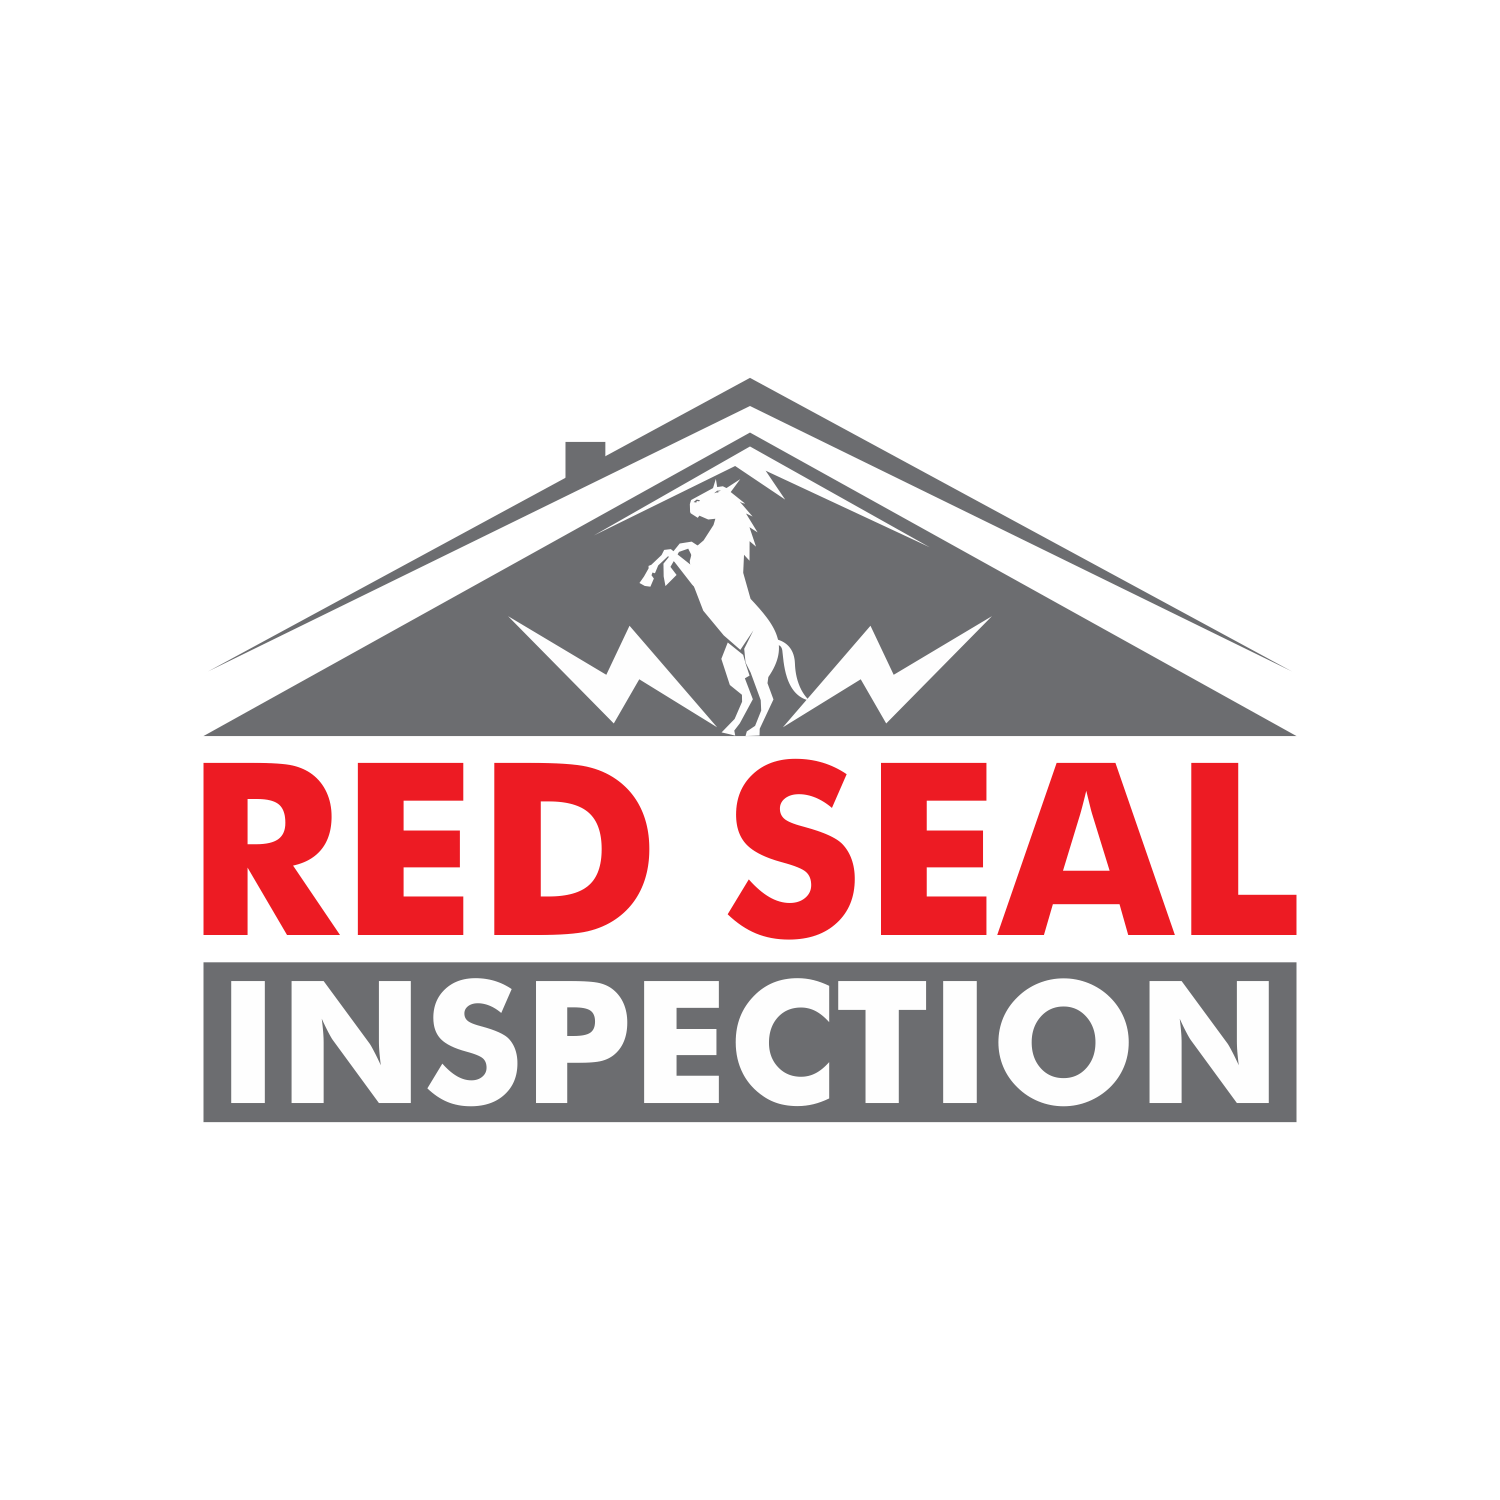 Red Seal Logo - Serious, Professional, Home Inspection Logo Design for Red Seal